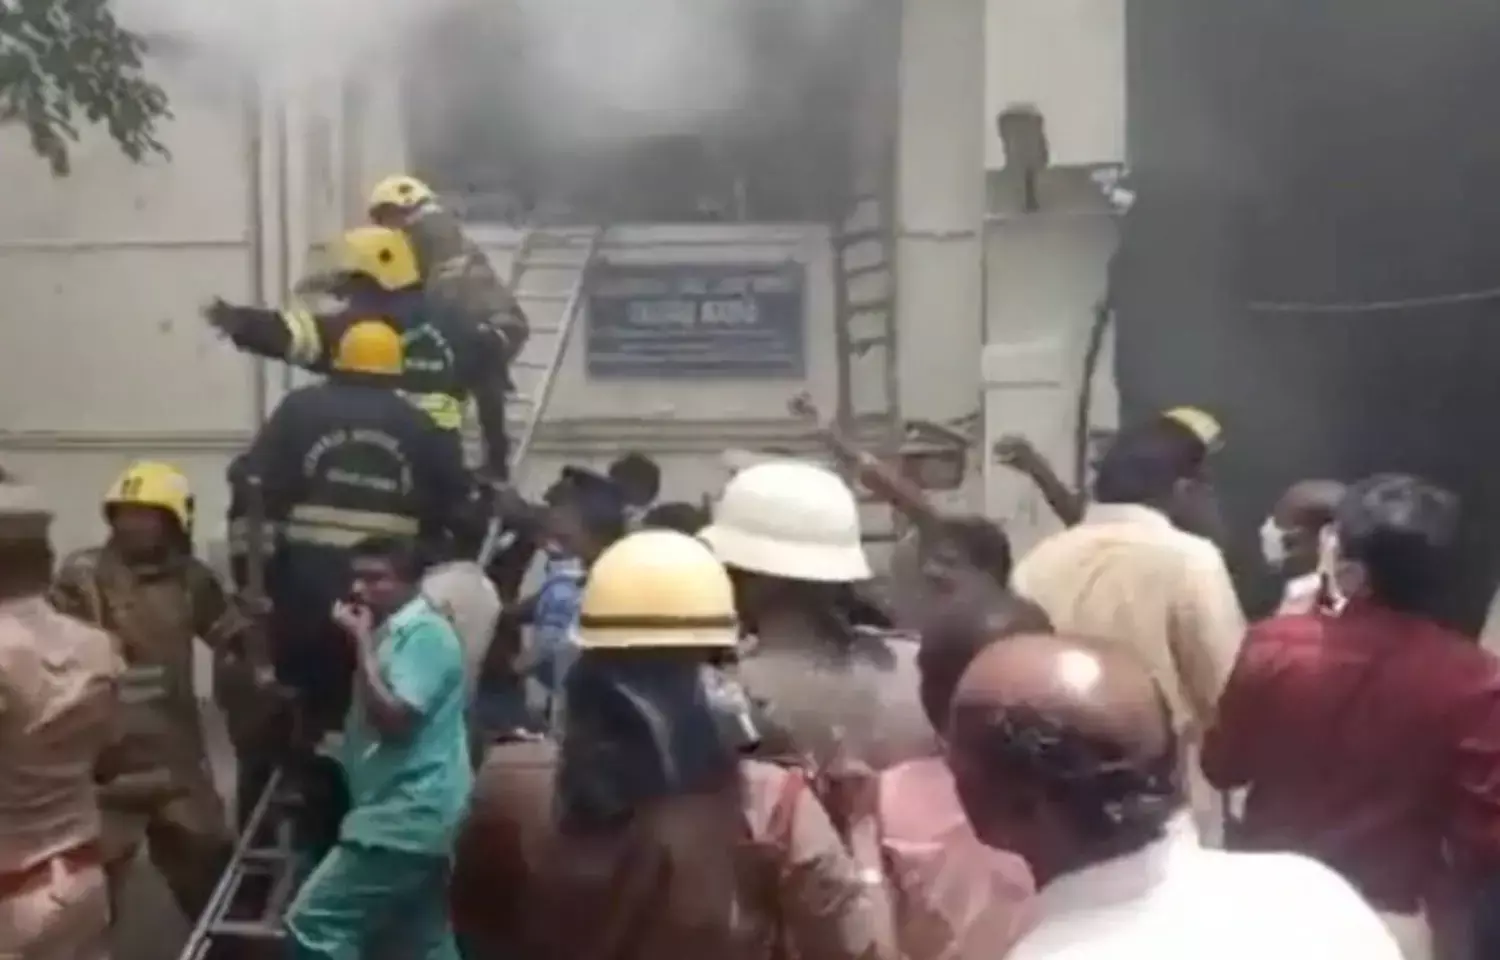 Chennai: Fire breaks out at Rajiv Gandhi government hospital, no casualties reported